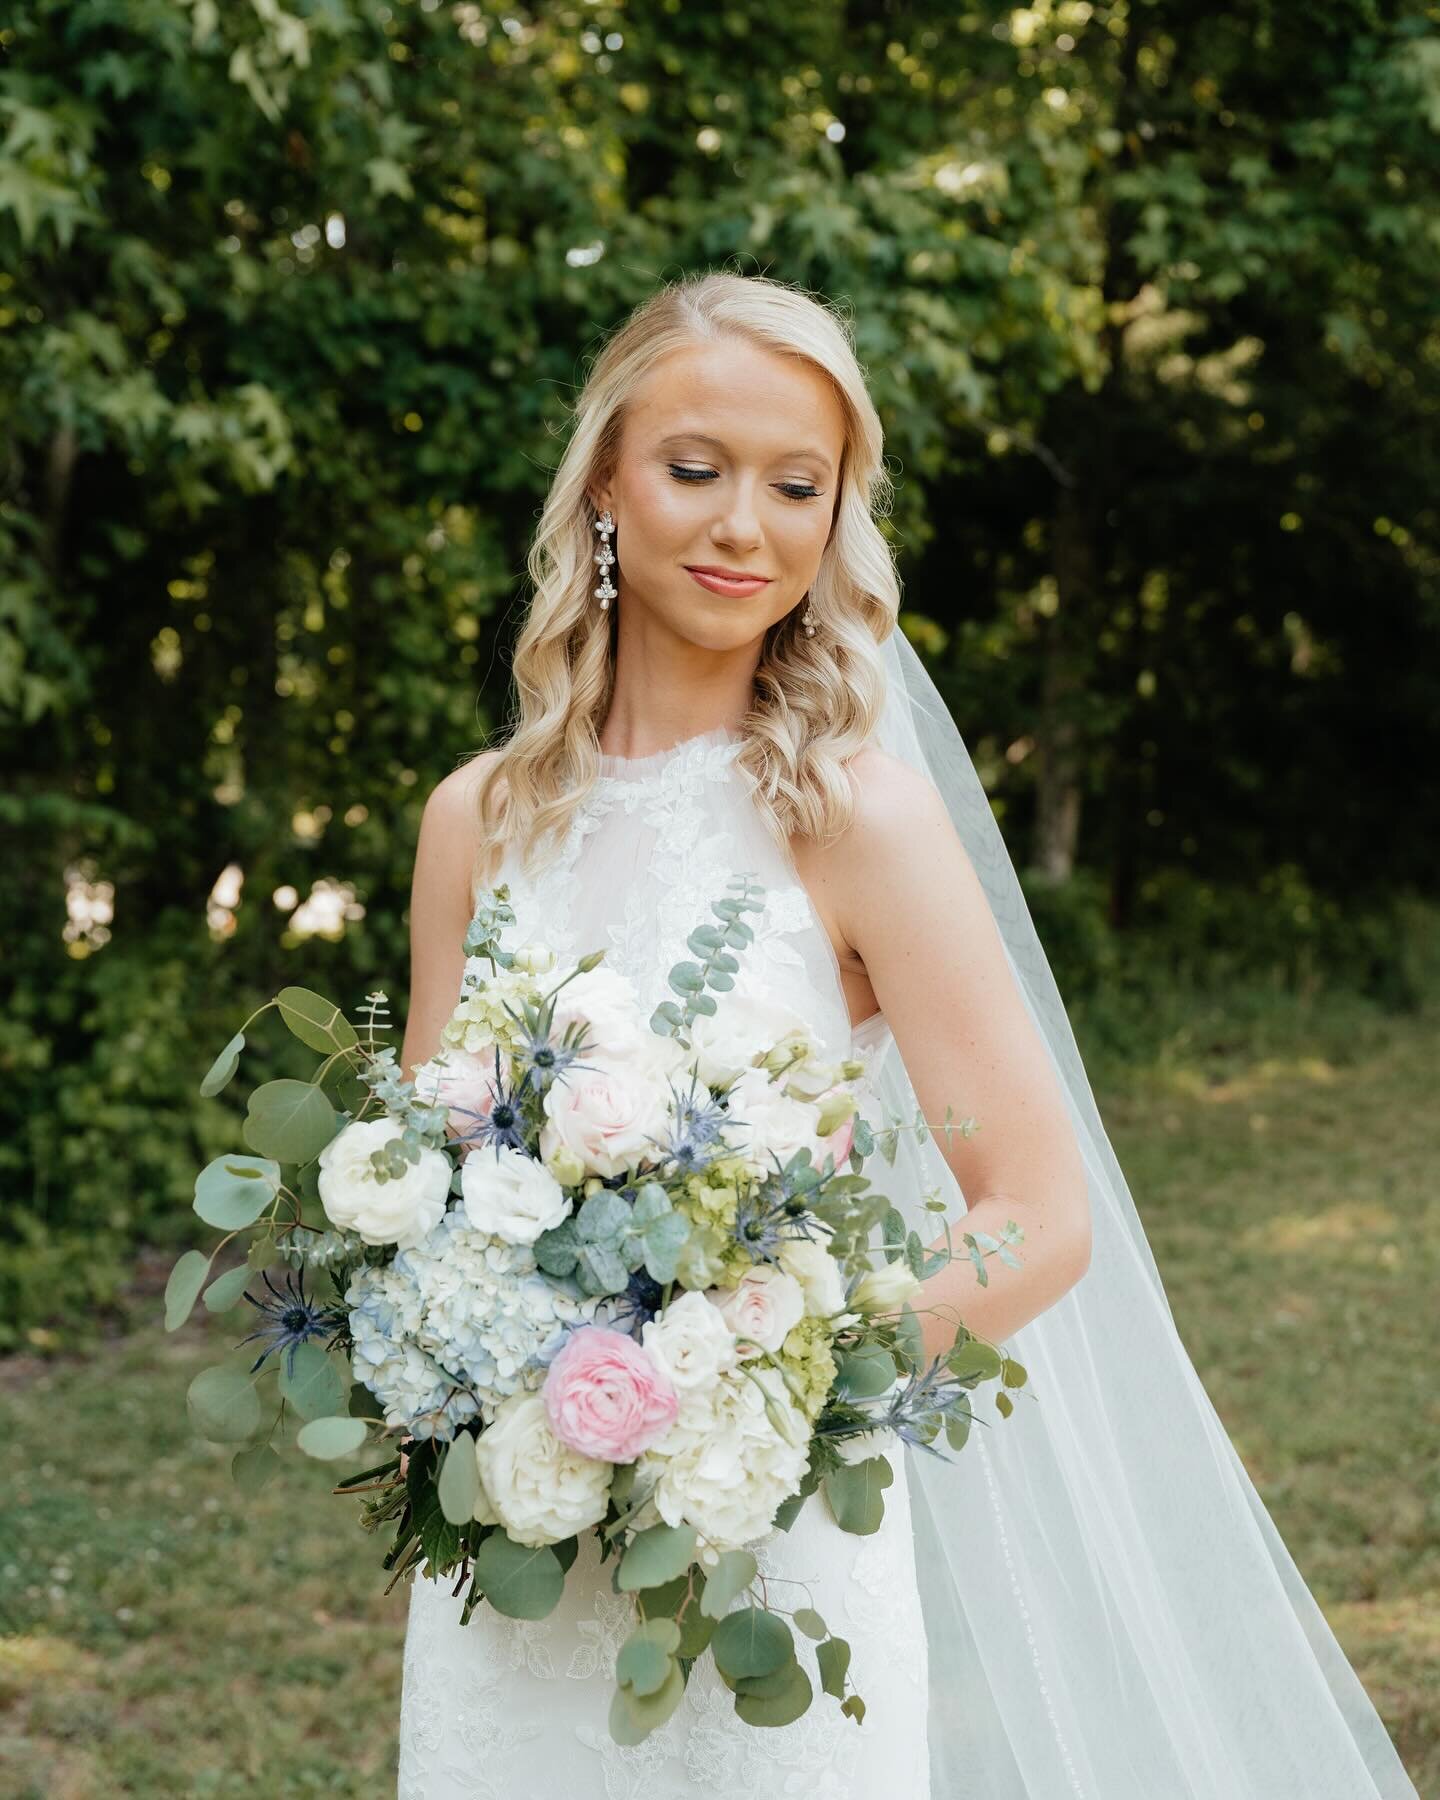 Today is a warm sunny day in Arkansas and it&rsquo;s making me desperately miss wedding season! I would do anything for a pretty, summer, wedding day right now, so here&rsquo;s some bridal photos to remind me of the good days!